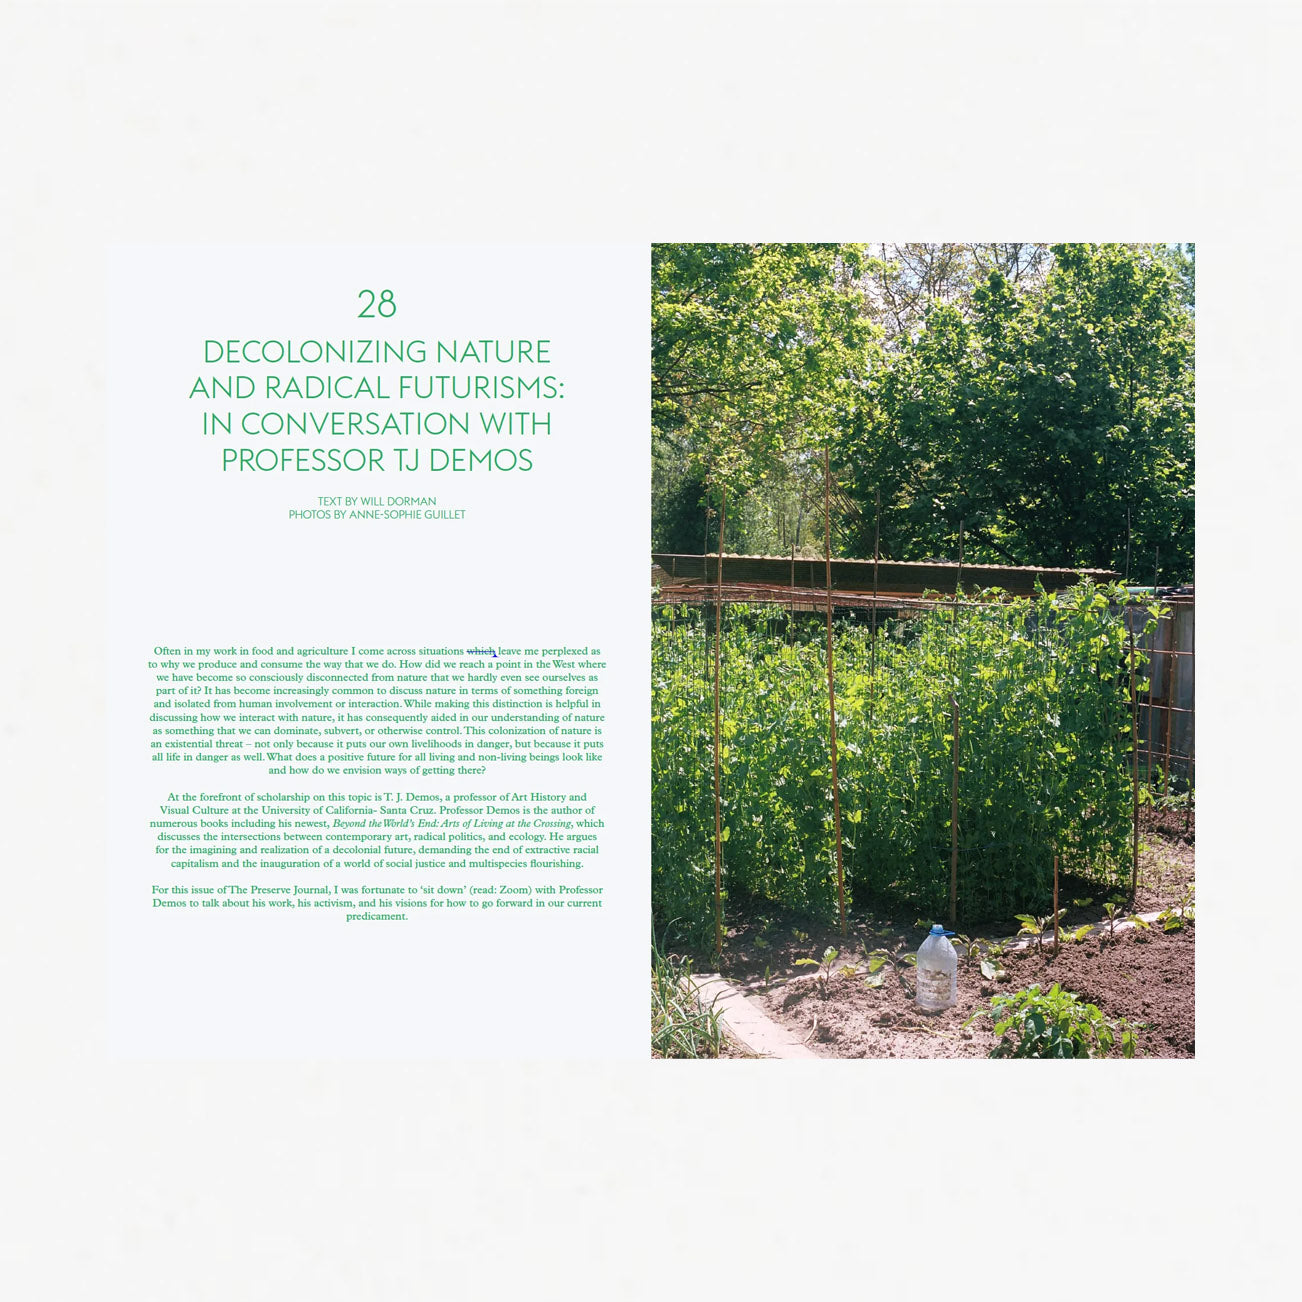 The Preserve Journal Issue 6